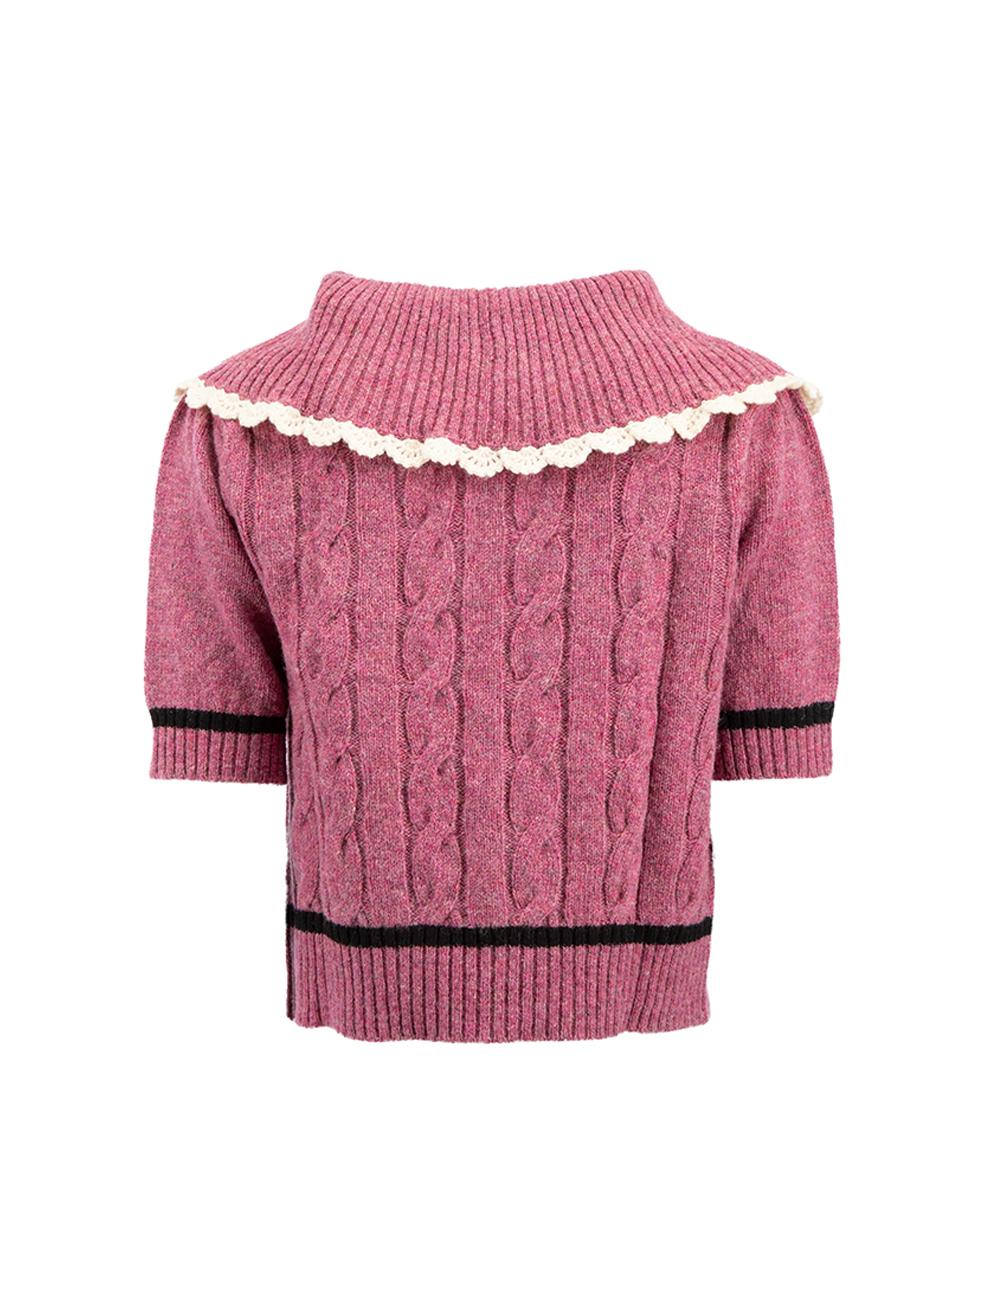 Miu Miu Pink Wool Cable Knit Collared Top Size S In Good Condition In London, GB